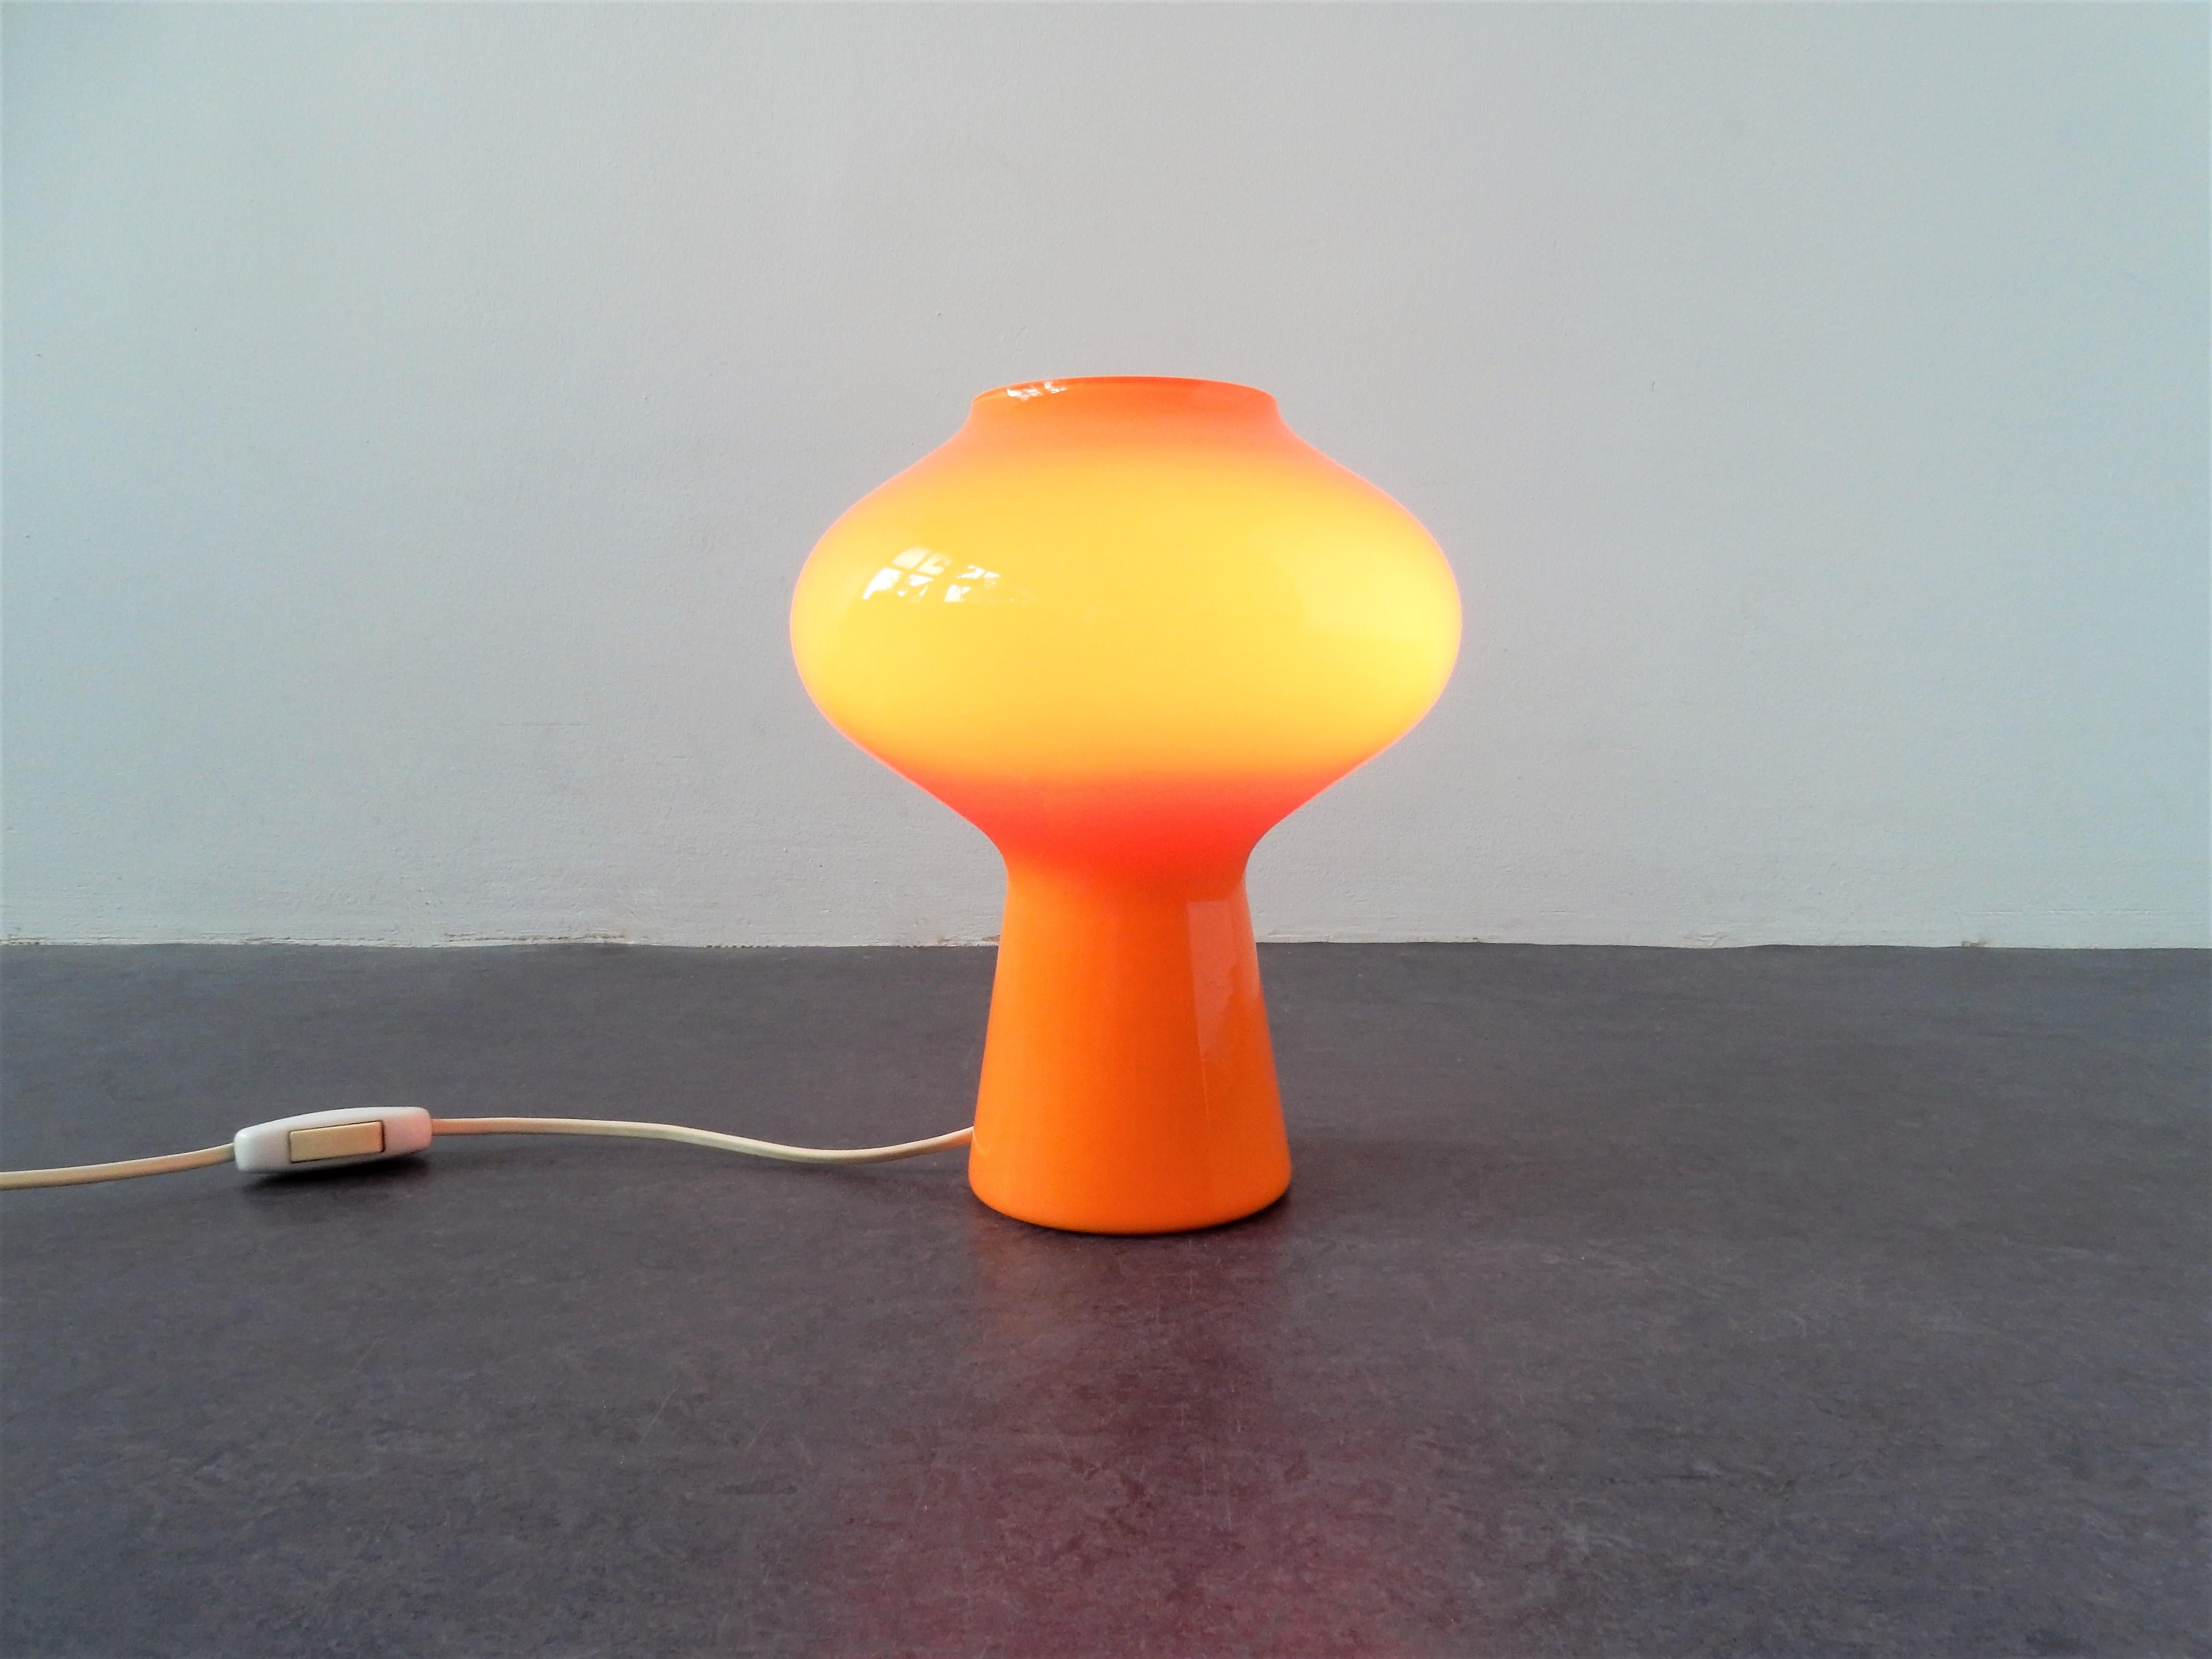 This orange Murano glass table lamp goes by the name of 'Fungo', this translates to Mushroom. A design by Massimo Vignelli and produced by Venini. Italian designed glass lighting from the 1950s. This lamps is in an excellent condition with no chips